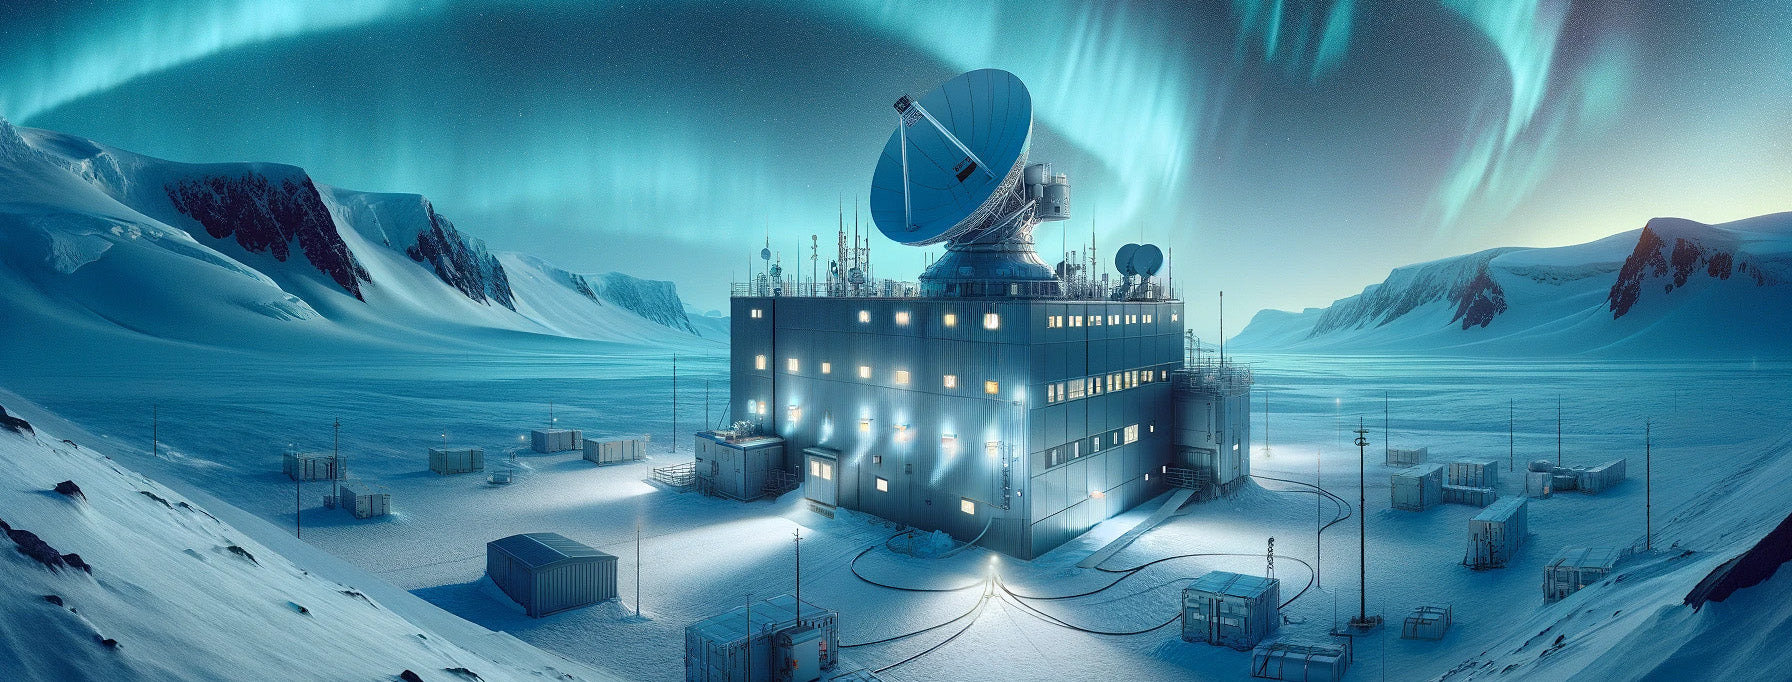 Research Building in Polar Regions of the Planet